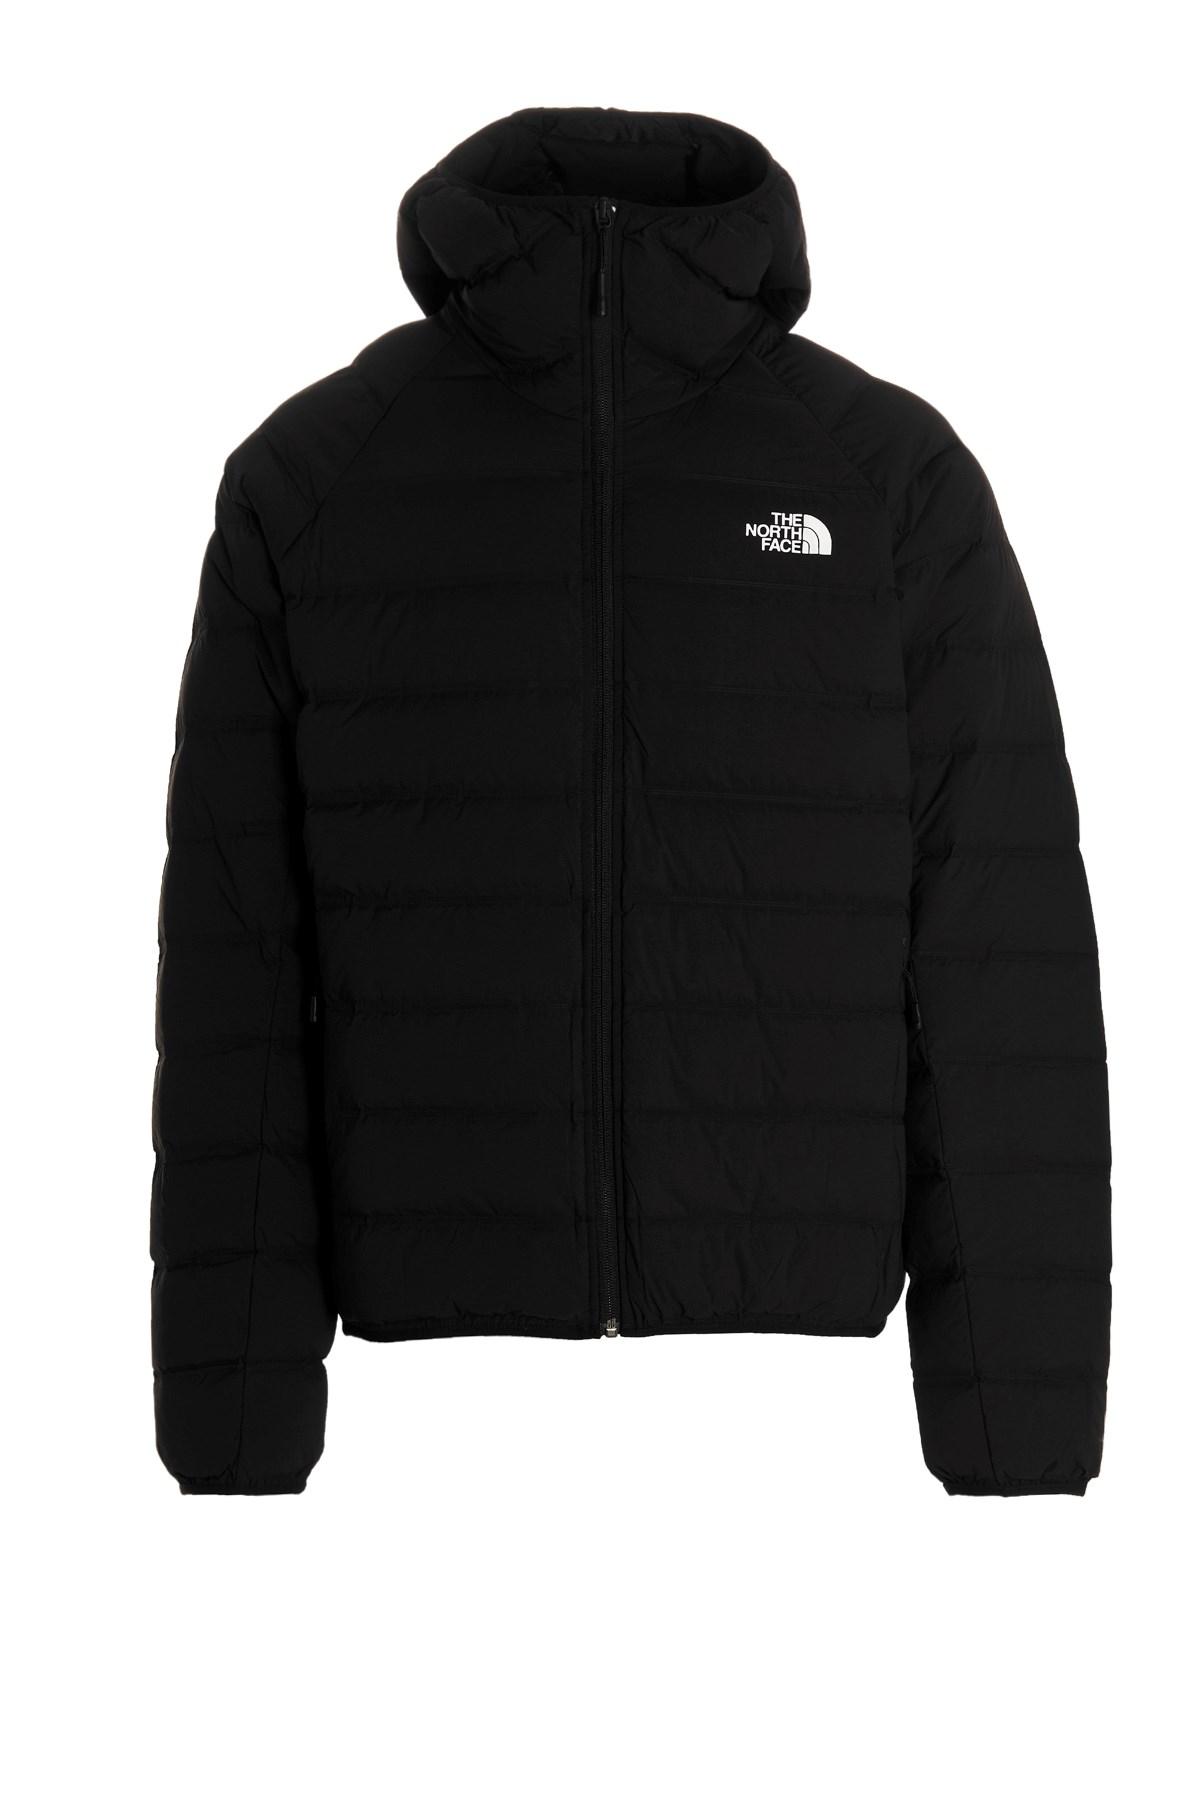 The North Face 'm Rmst' Hooded Down Jacket in Black for Men | Lyst UK